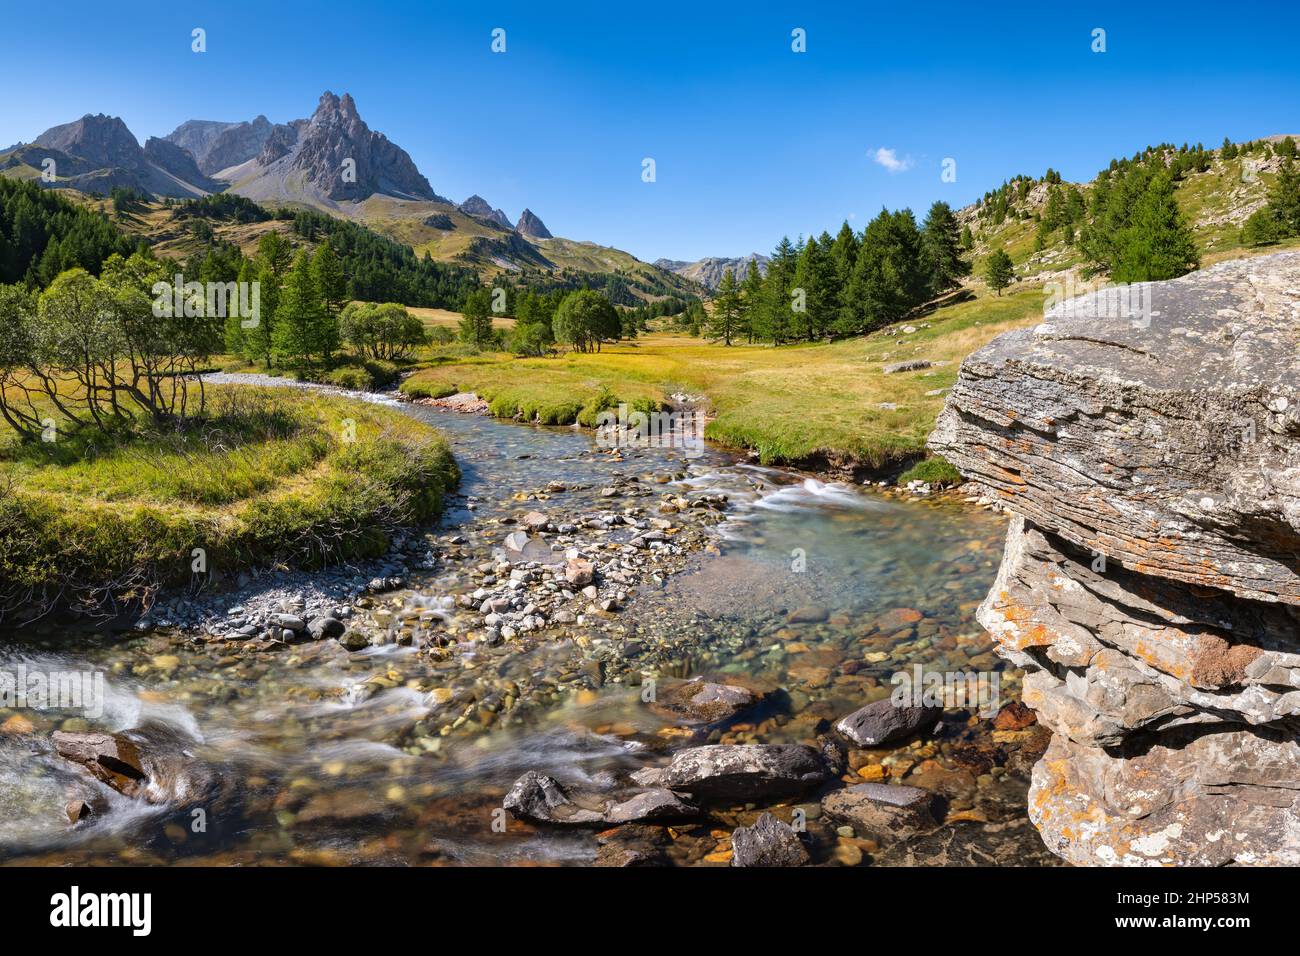 La Claree river in Summer with the Main de Crepin peak in the Cerces Massif mountains. Claree Valley (Laval) in Hautes Alpes (Alps), France Stock Photo